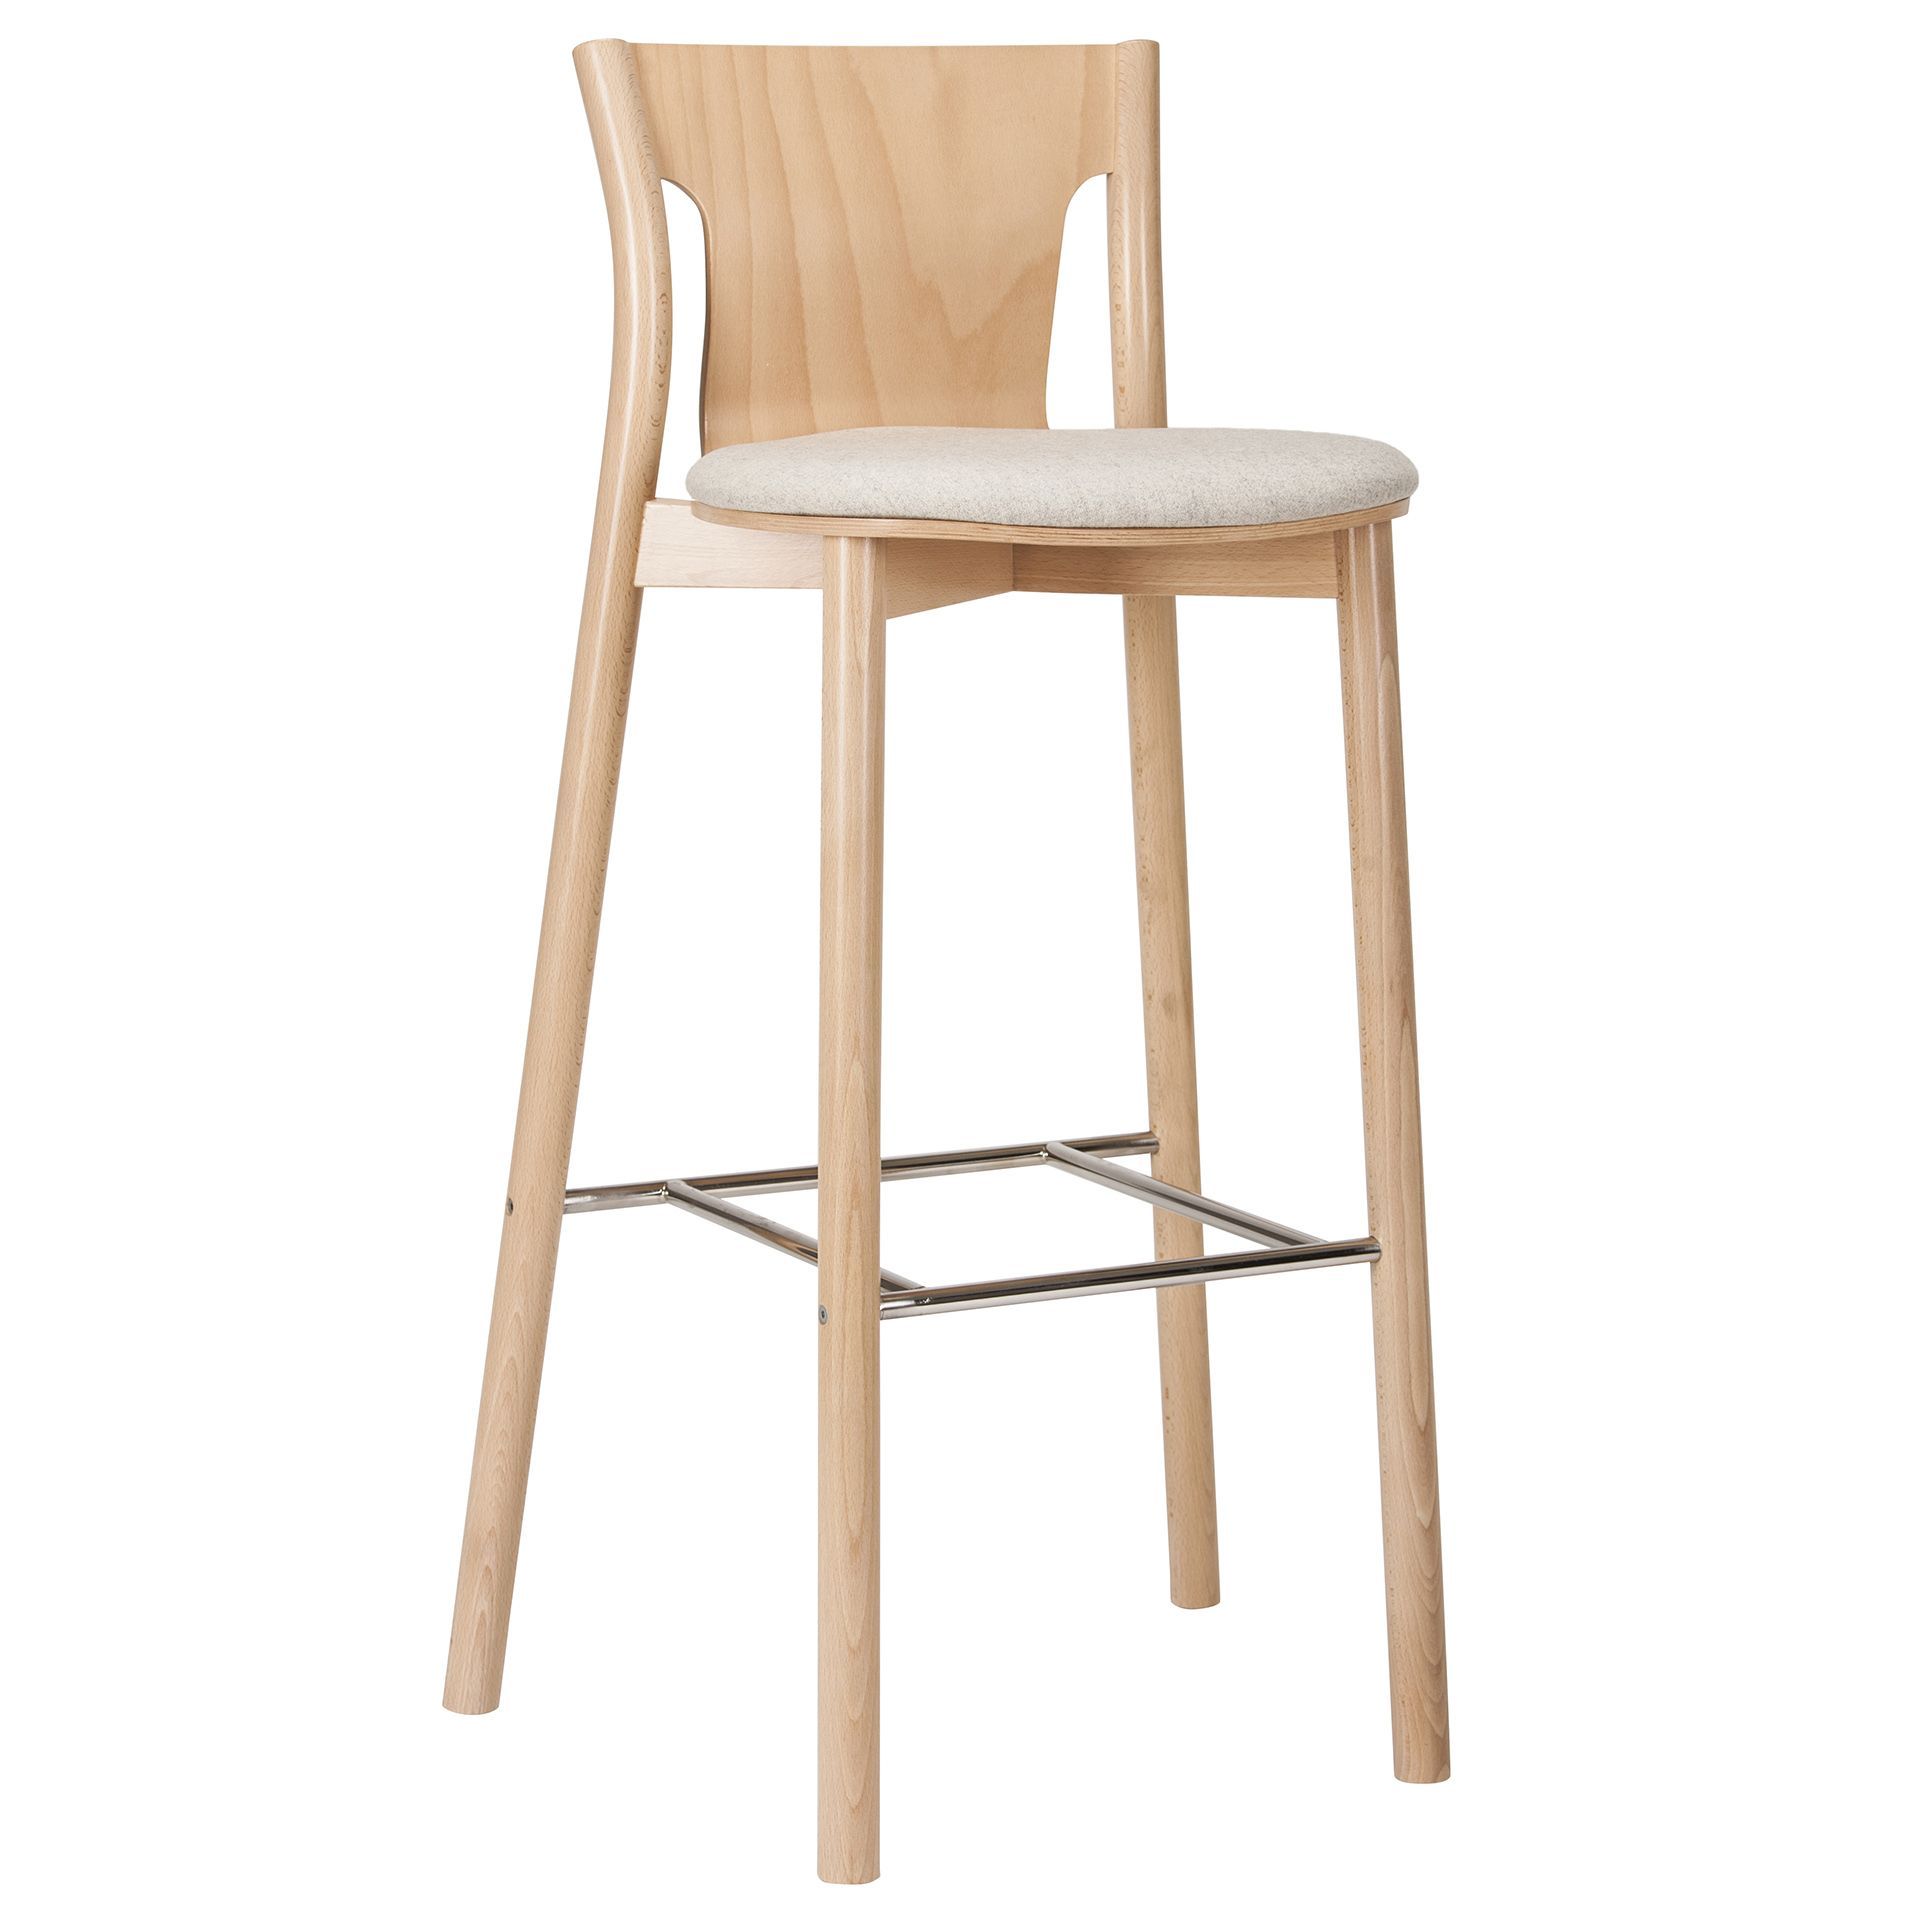 Bar stool H-2160 TOLO by Paged